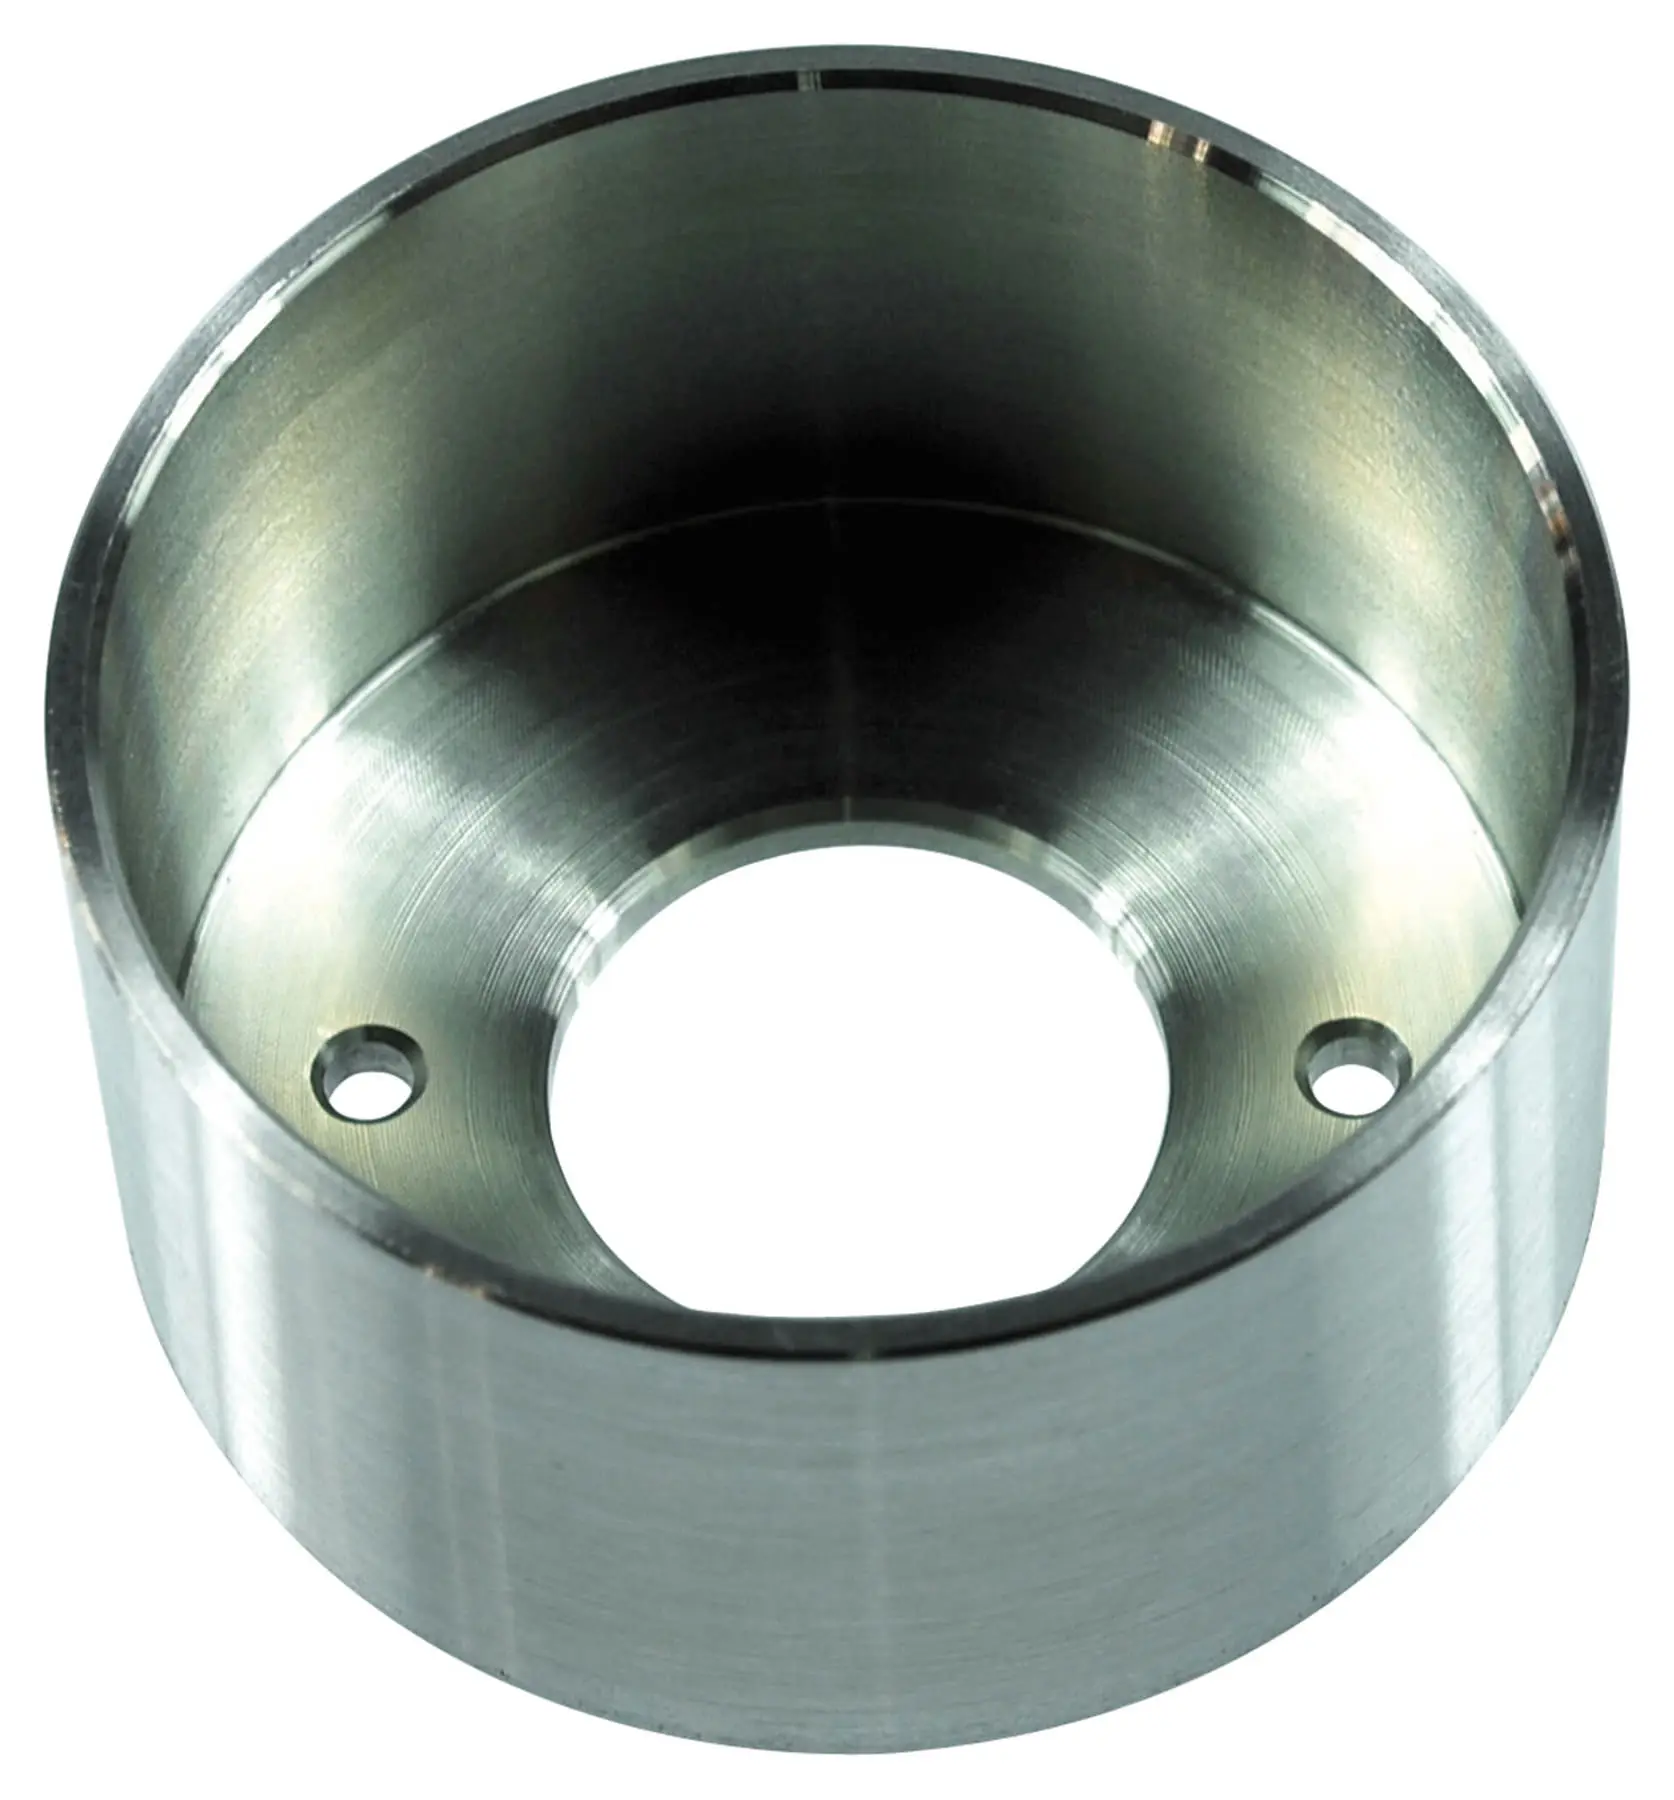 WELDING CUP STAINLESS